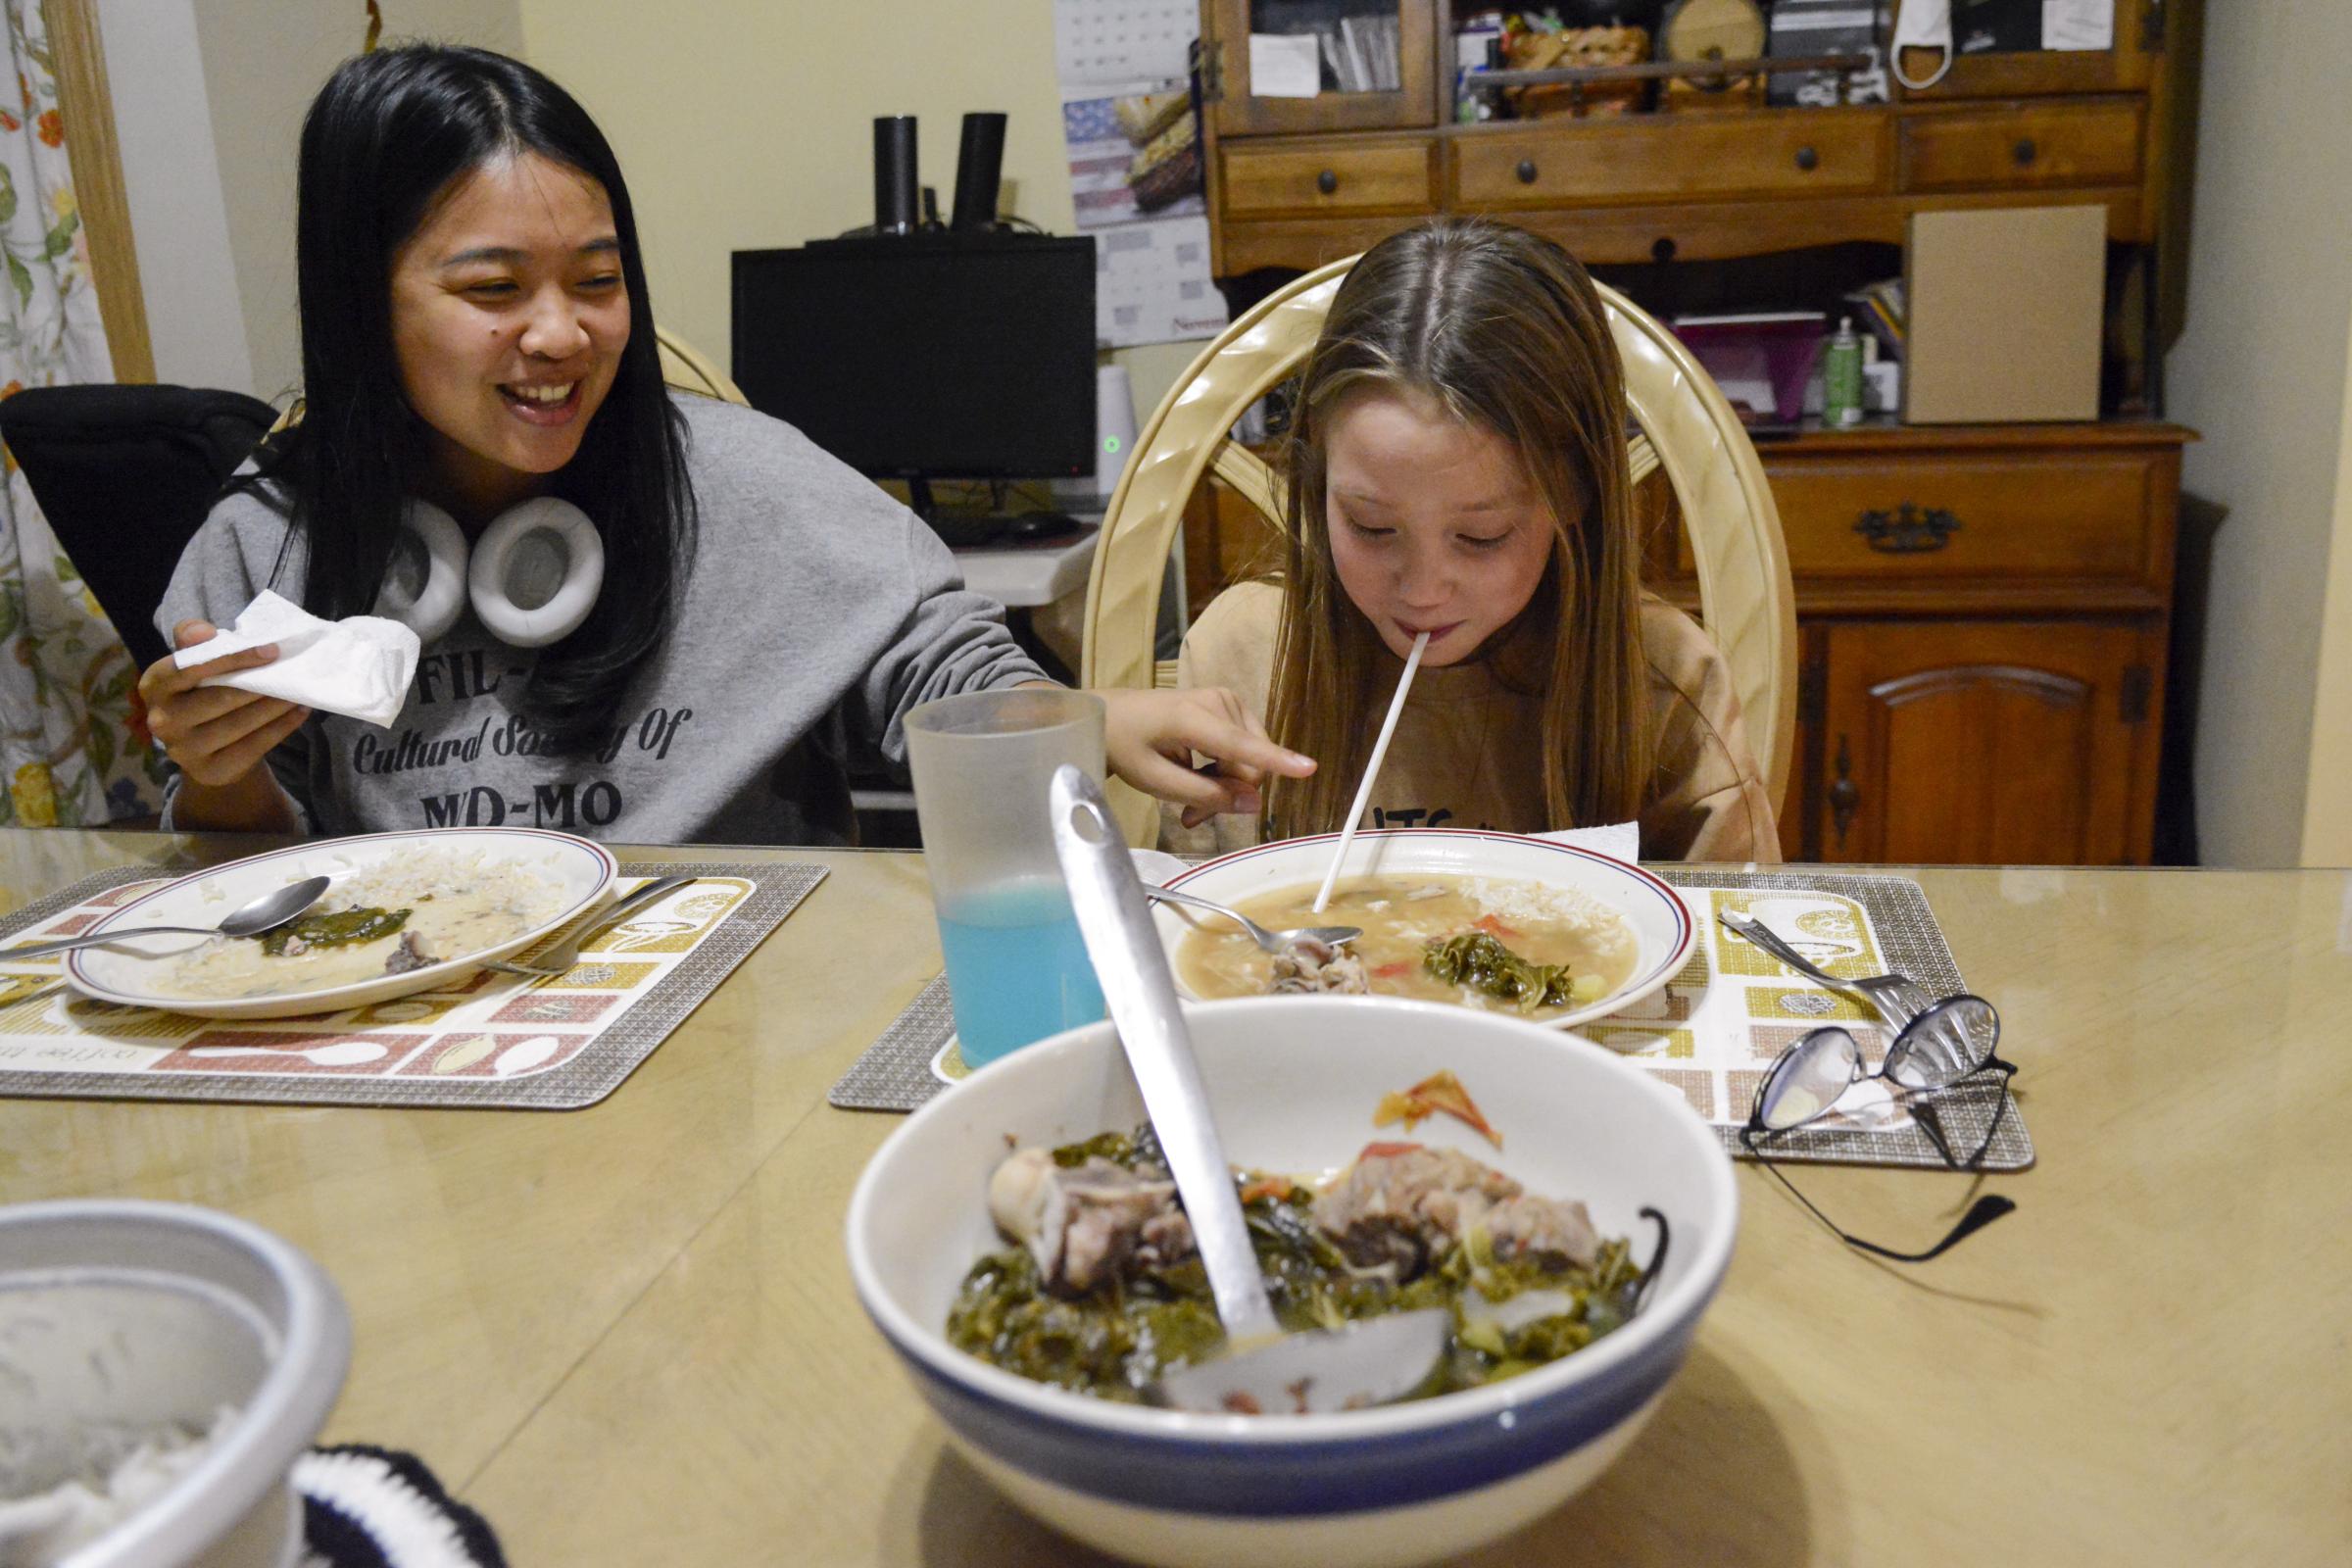 Making noise, breaking tradition - Campbell slurps up her dinner through a straw on Monday,...